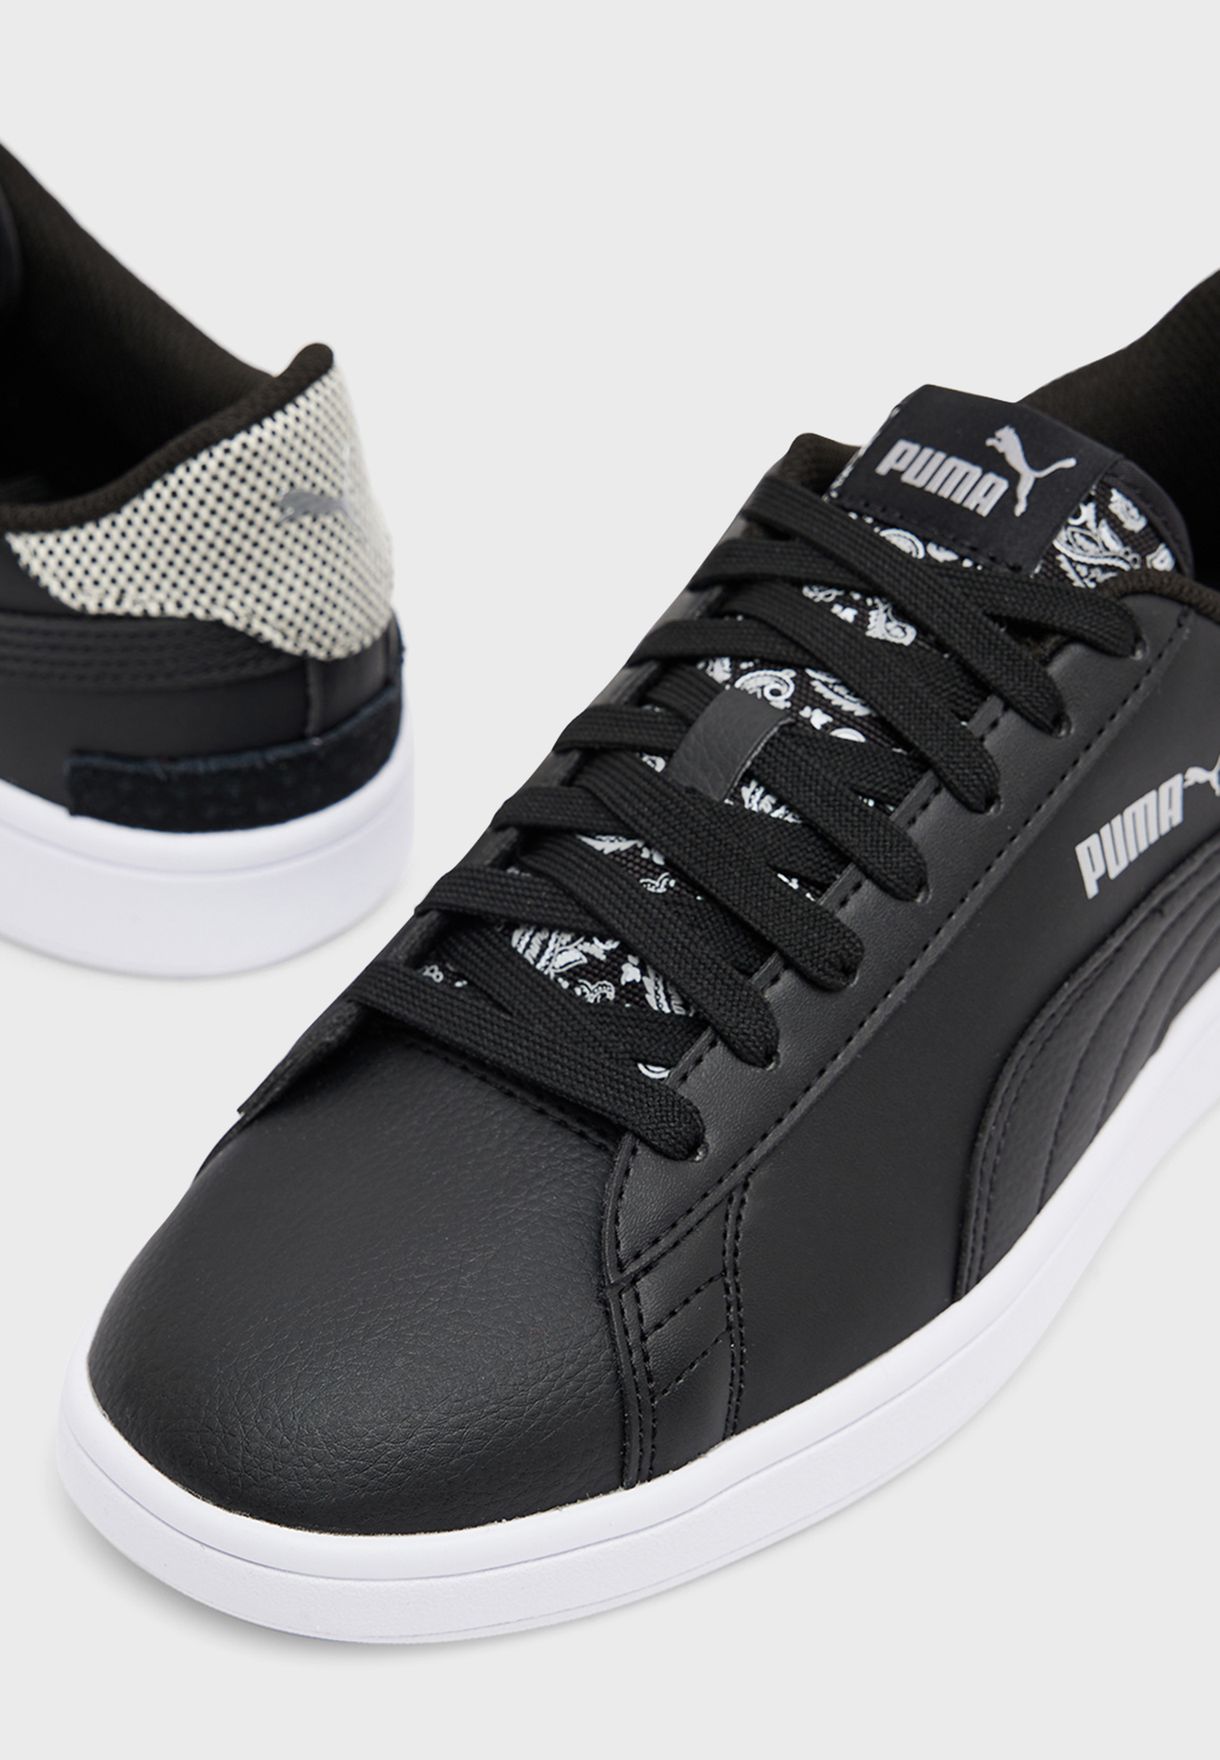 Buy PUMA black Smash V2 Patchwork Sneakers for Men in Doha, other cities